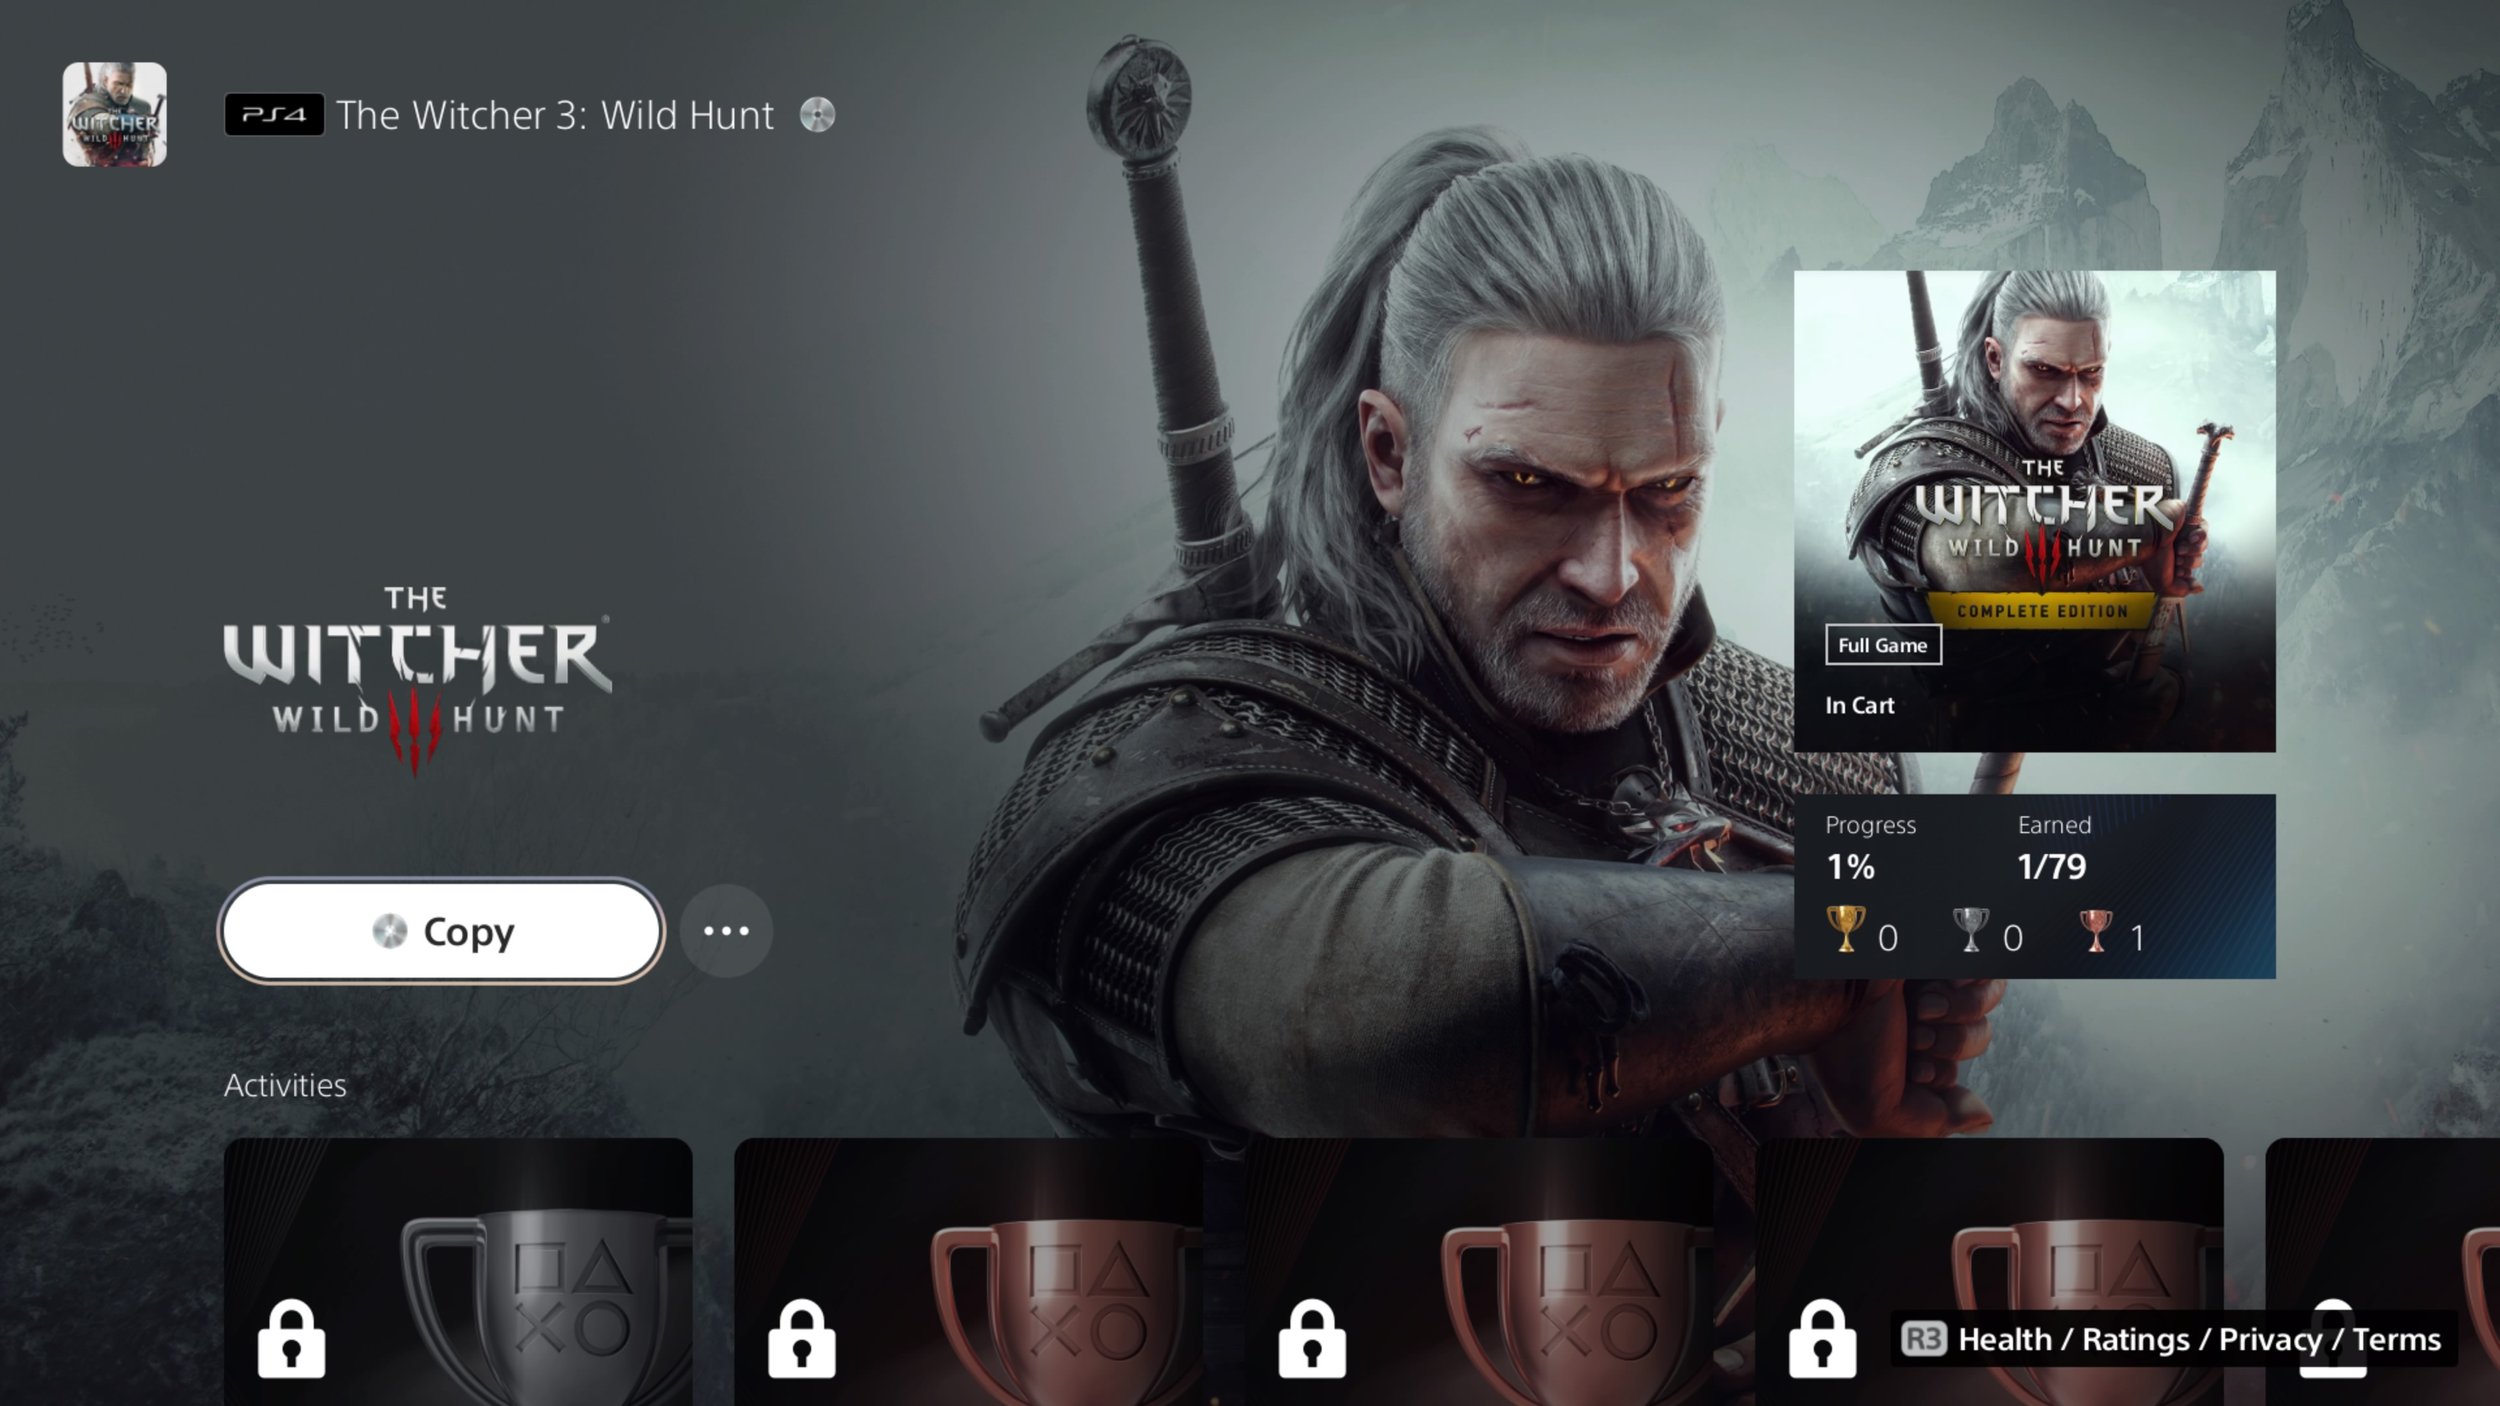 How to download Witcher 3 next-gen update on PS5, PC & Xbox Series X/S